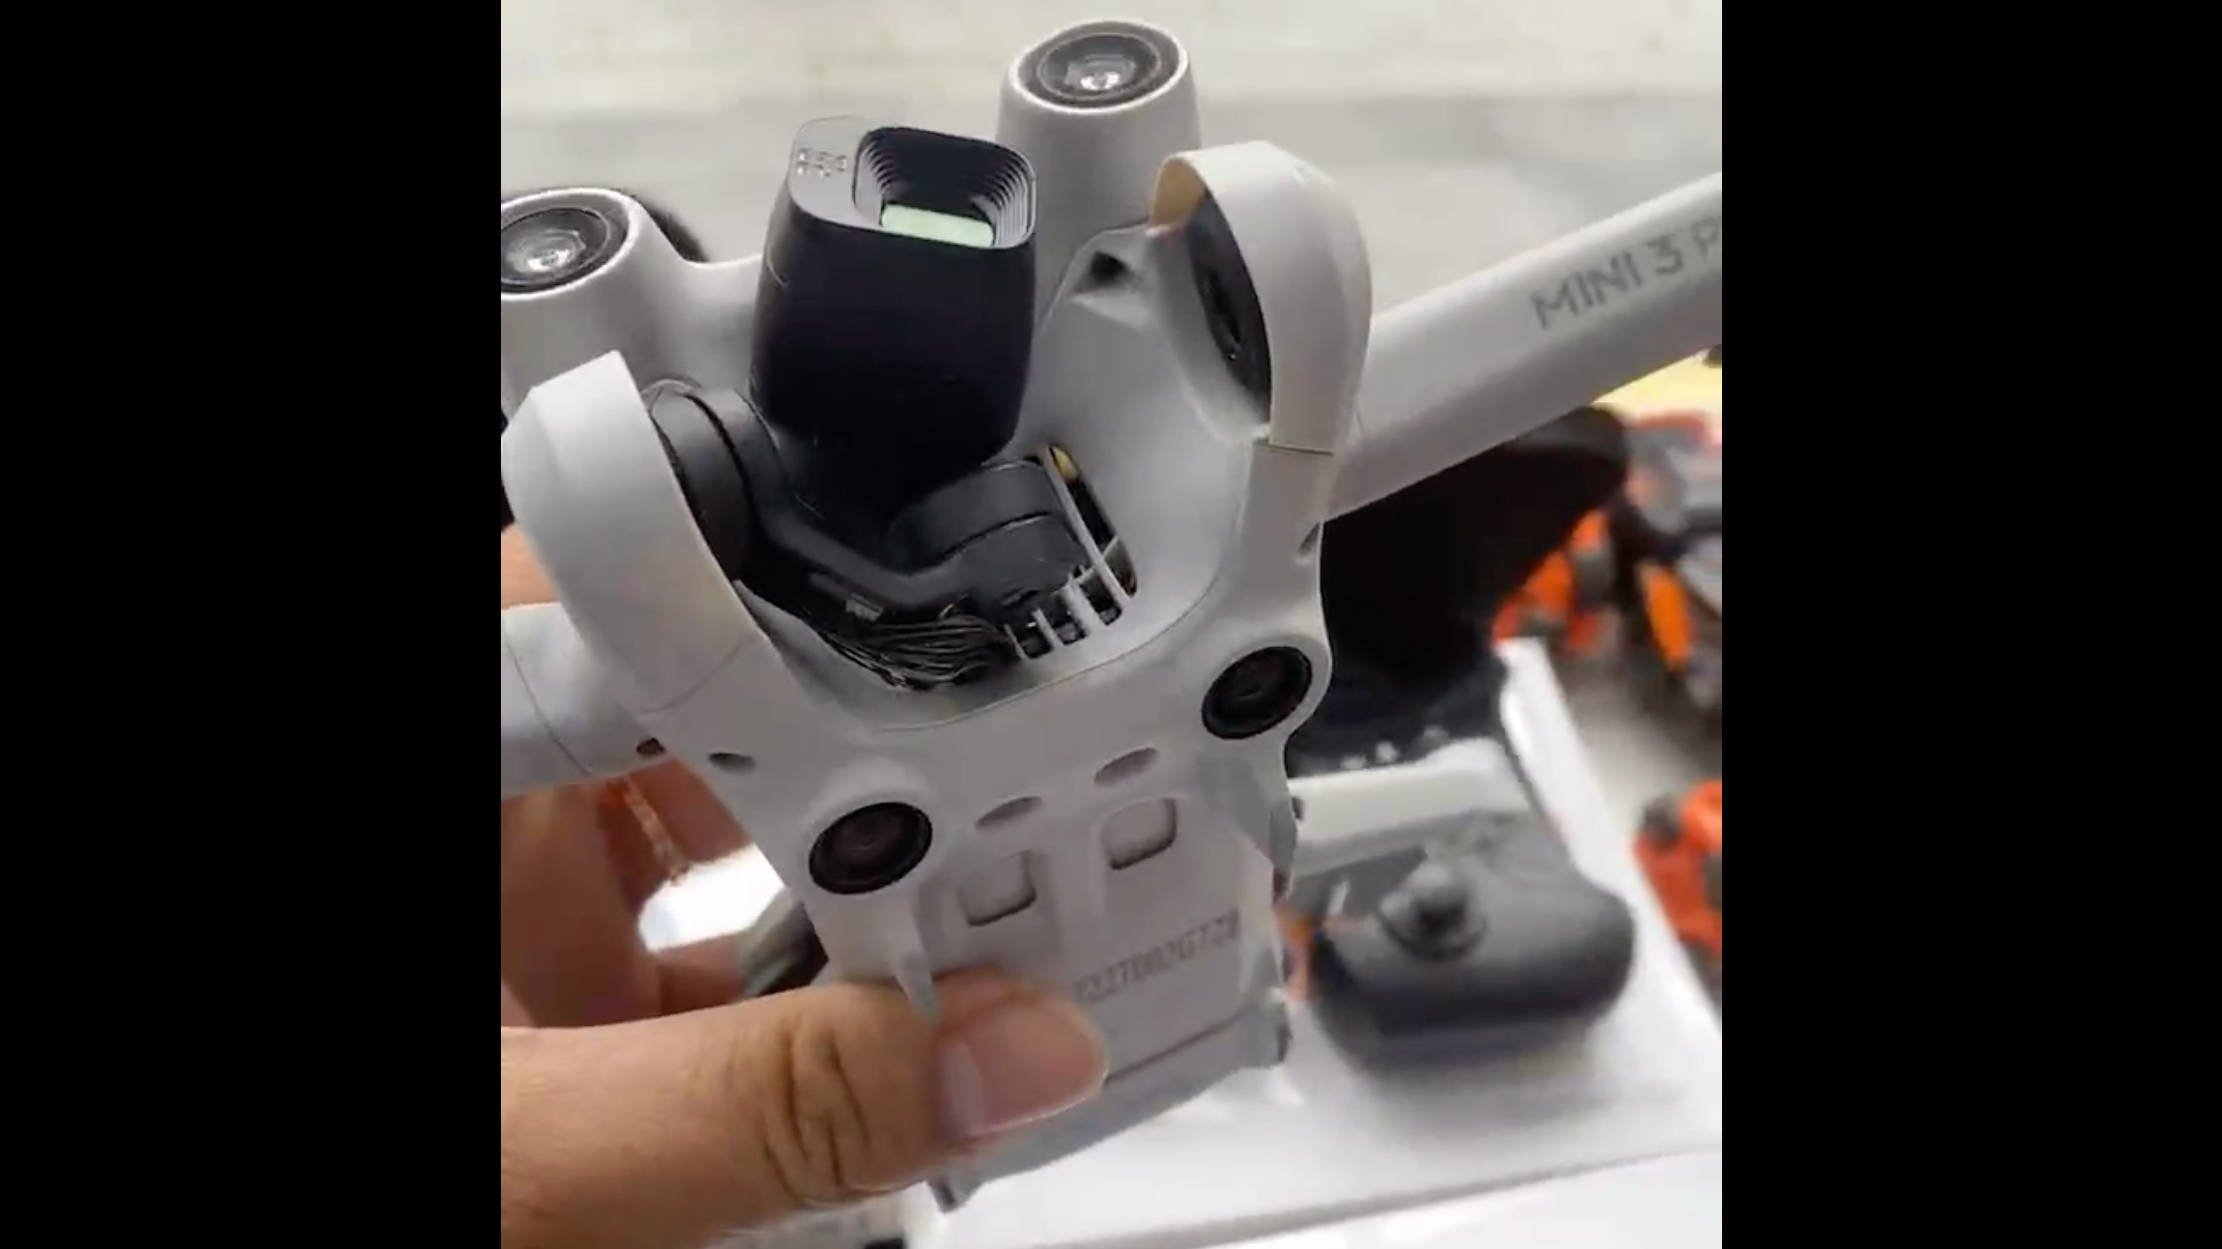 A hand holding a prototype of the DJI Mini 3 Pro